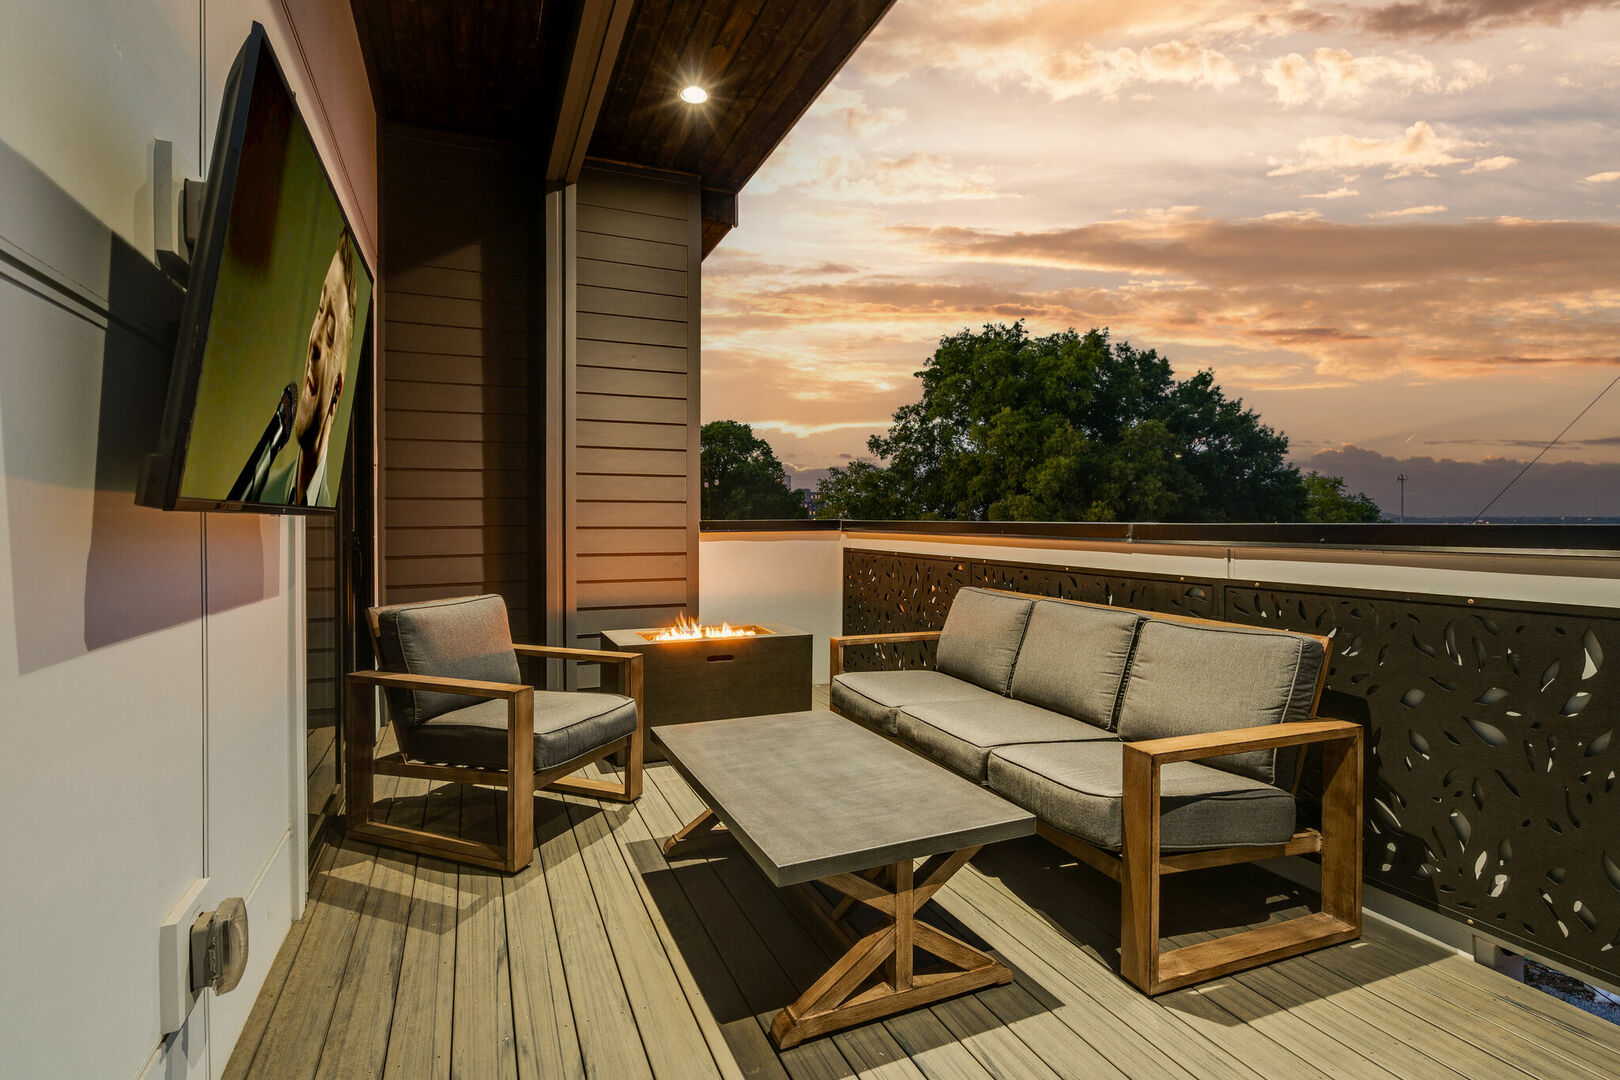 Unit 3: Rooftop balcony with outdoor BBQ, smart TV, fire pit, and seating.